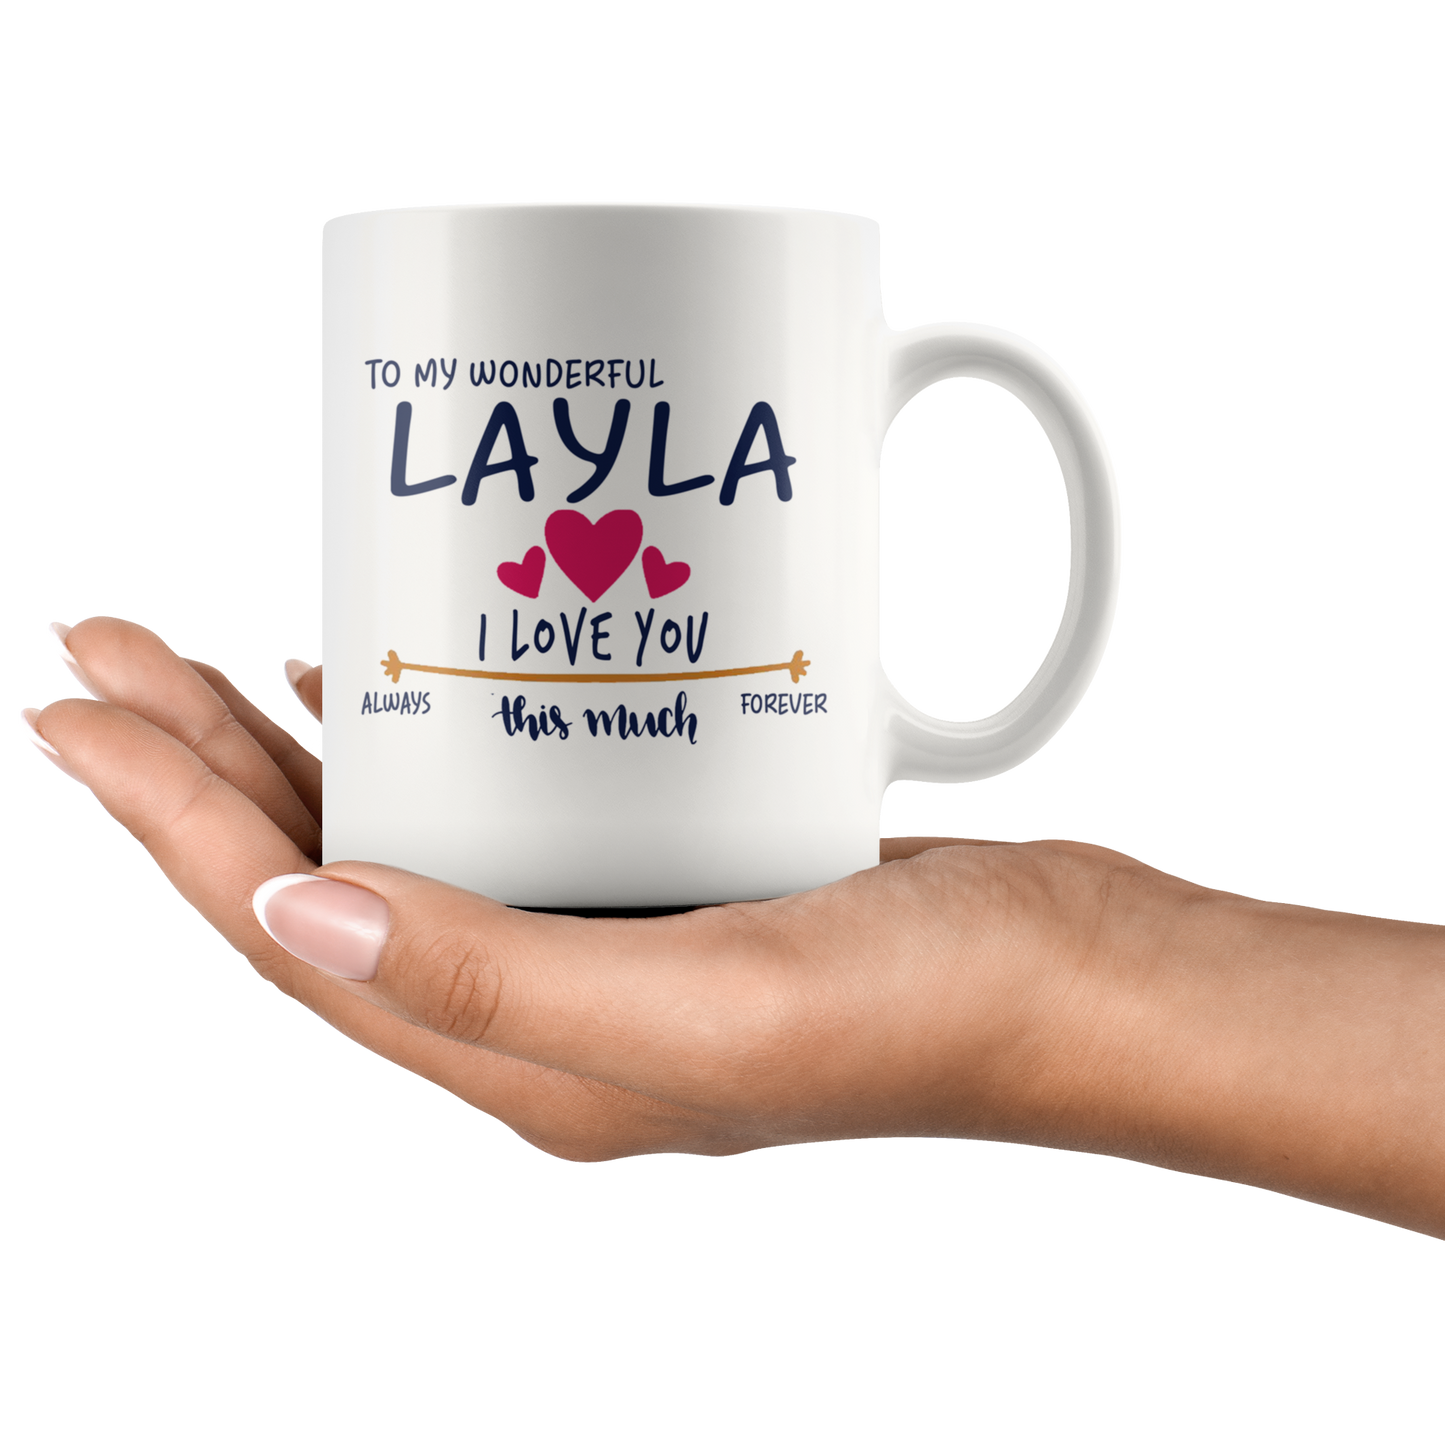 M-20477742-sp-19736 - Mother Day Gift For Wife Coffee Mug - To My Wonderful Layla